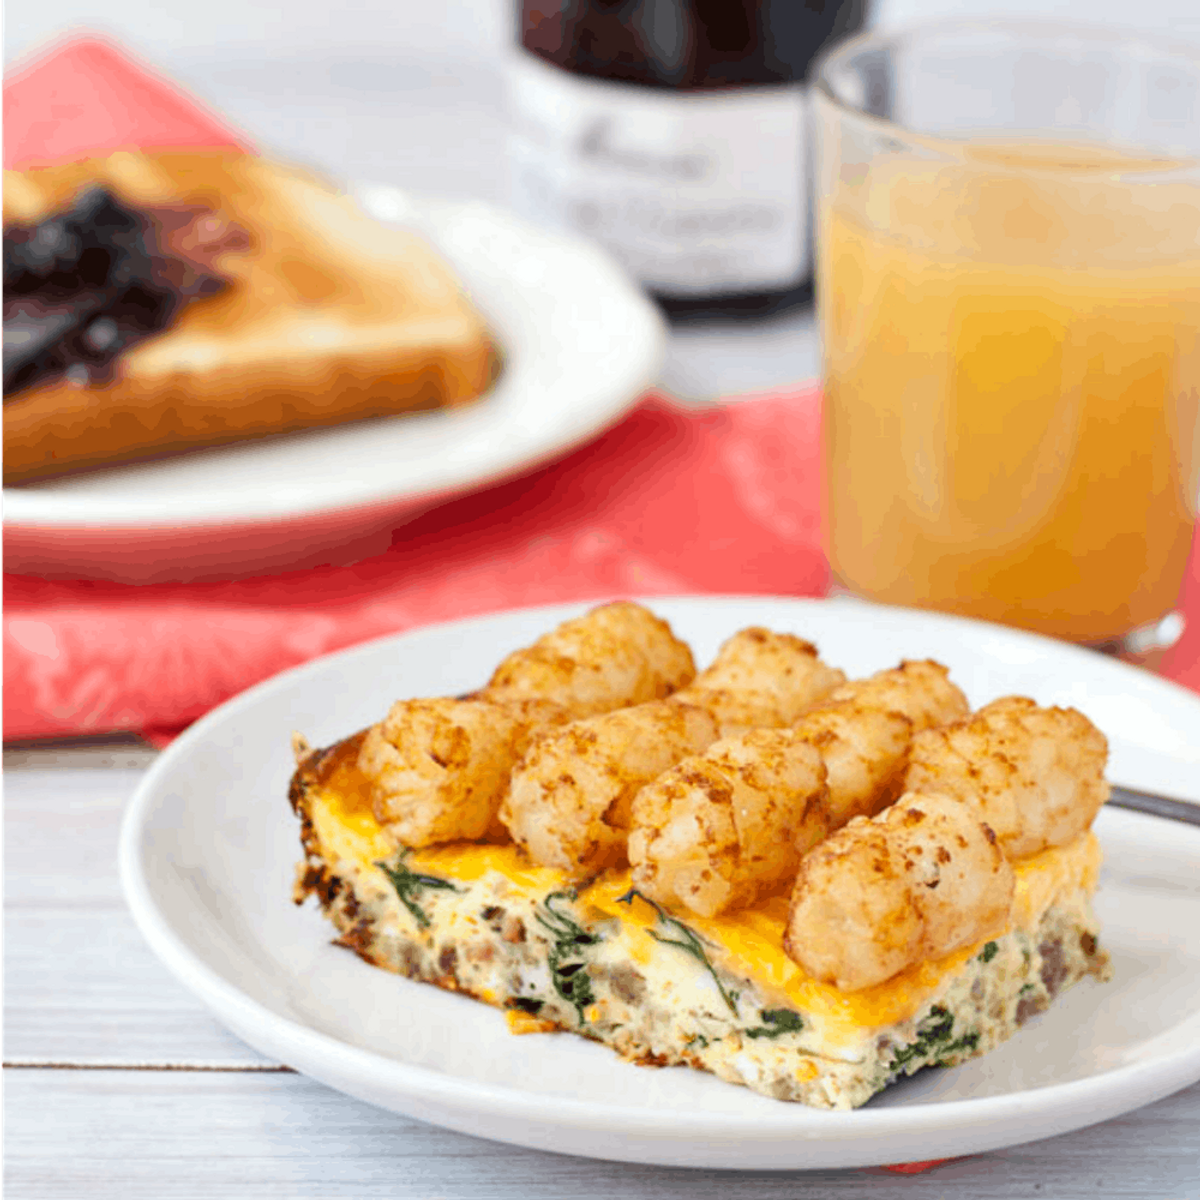 13 Breakfast Casseroles to Make Ahead When You’re Short on Time